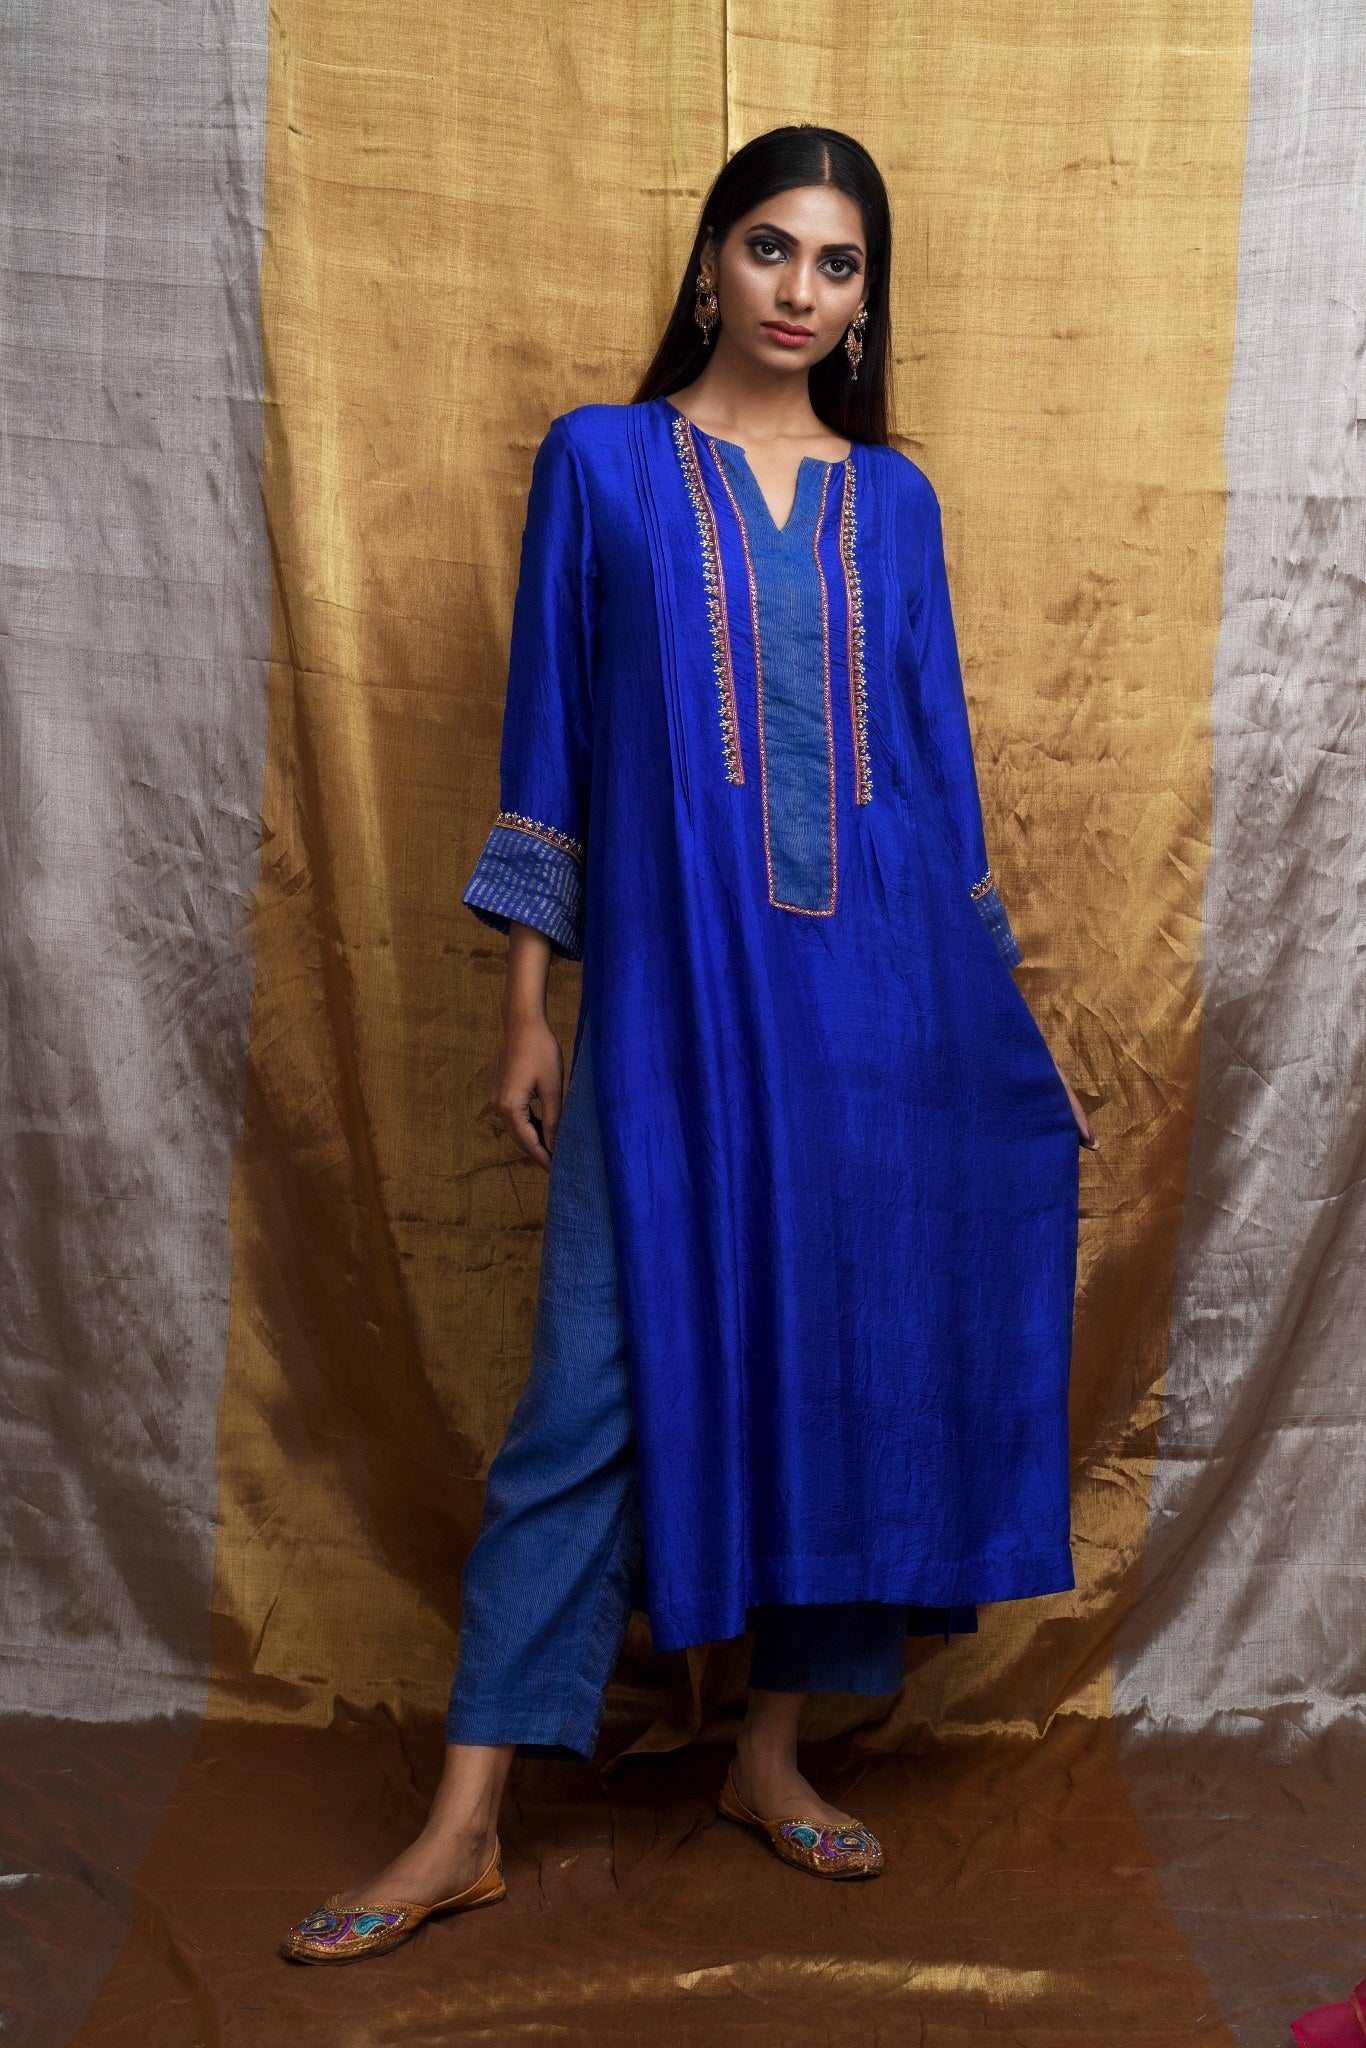 What goes with blue kurti? - Quora